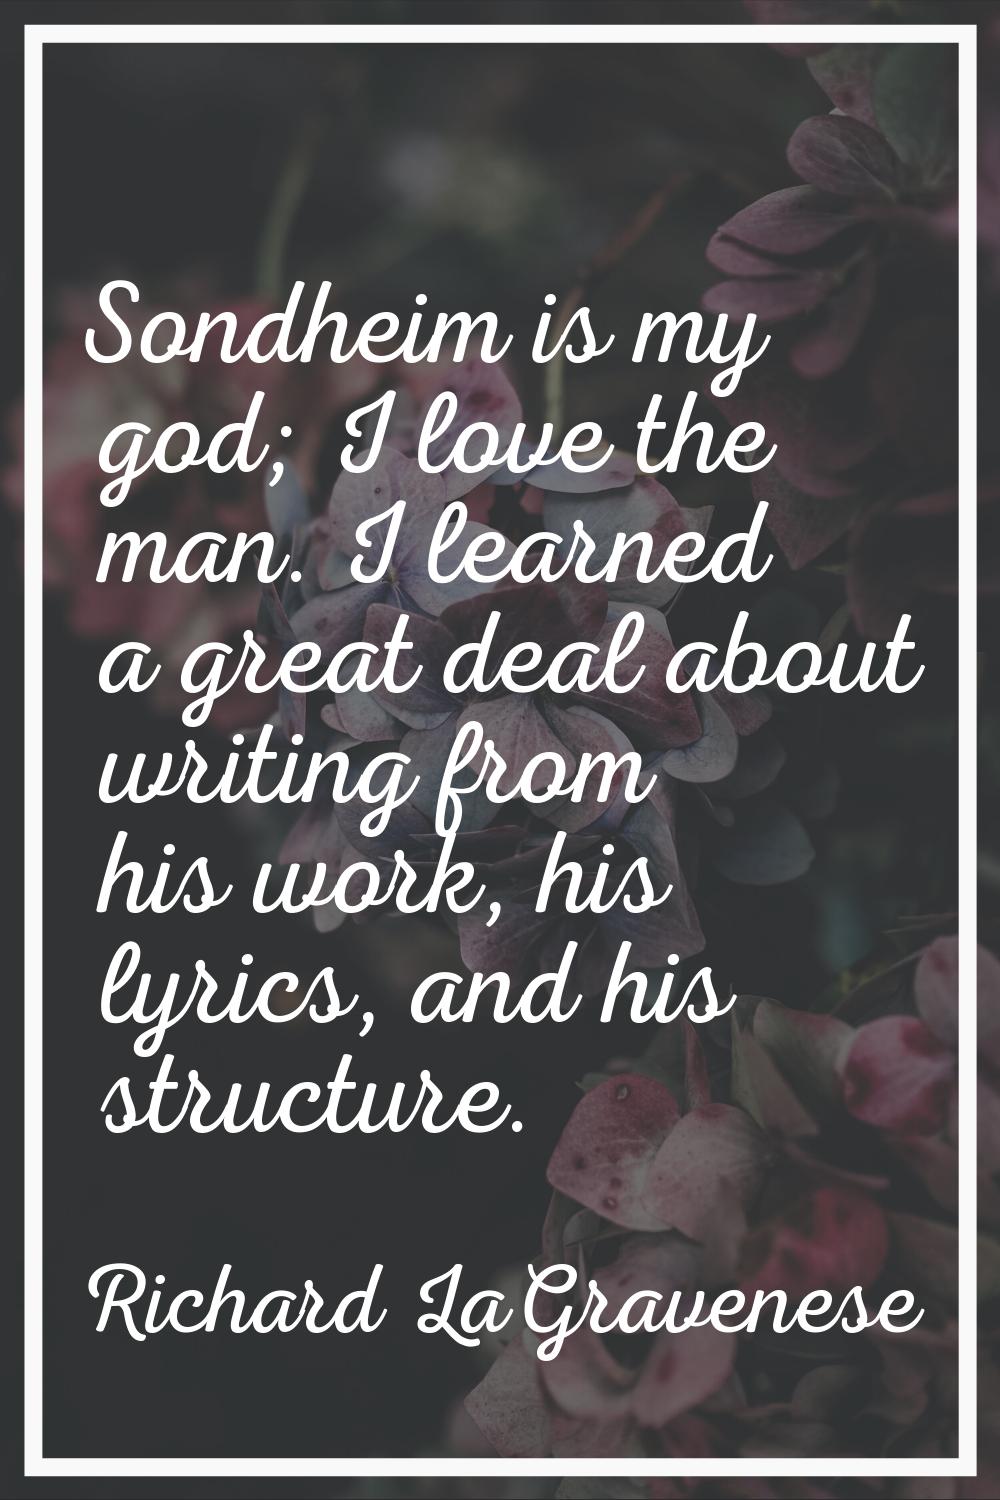 Sondheim is my god; I love the man. I learned a great deal about writing from his work, his lyrics,